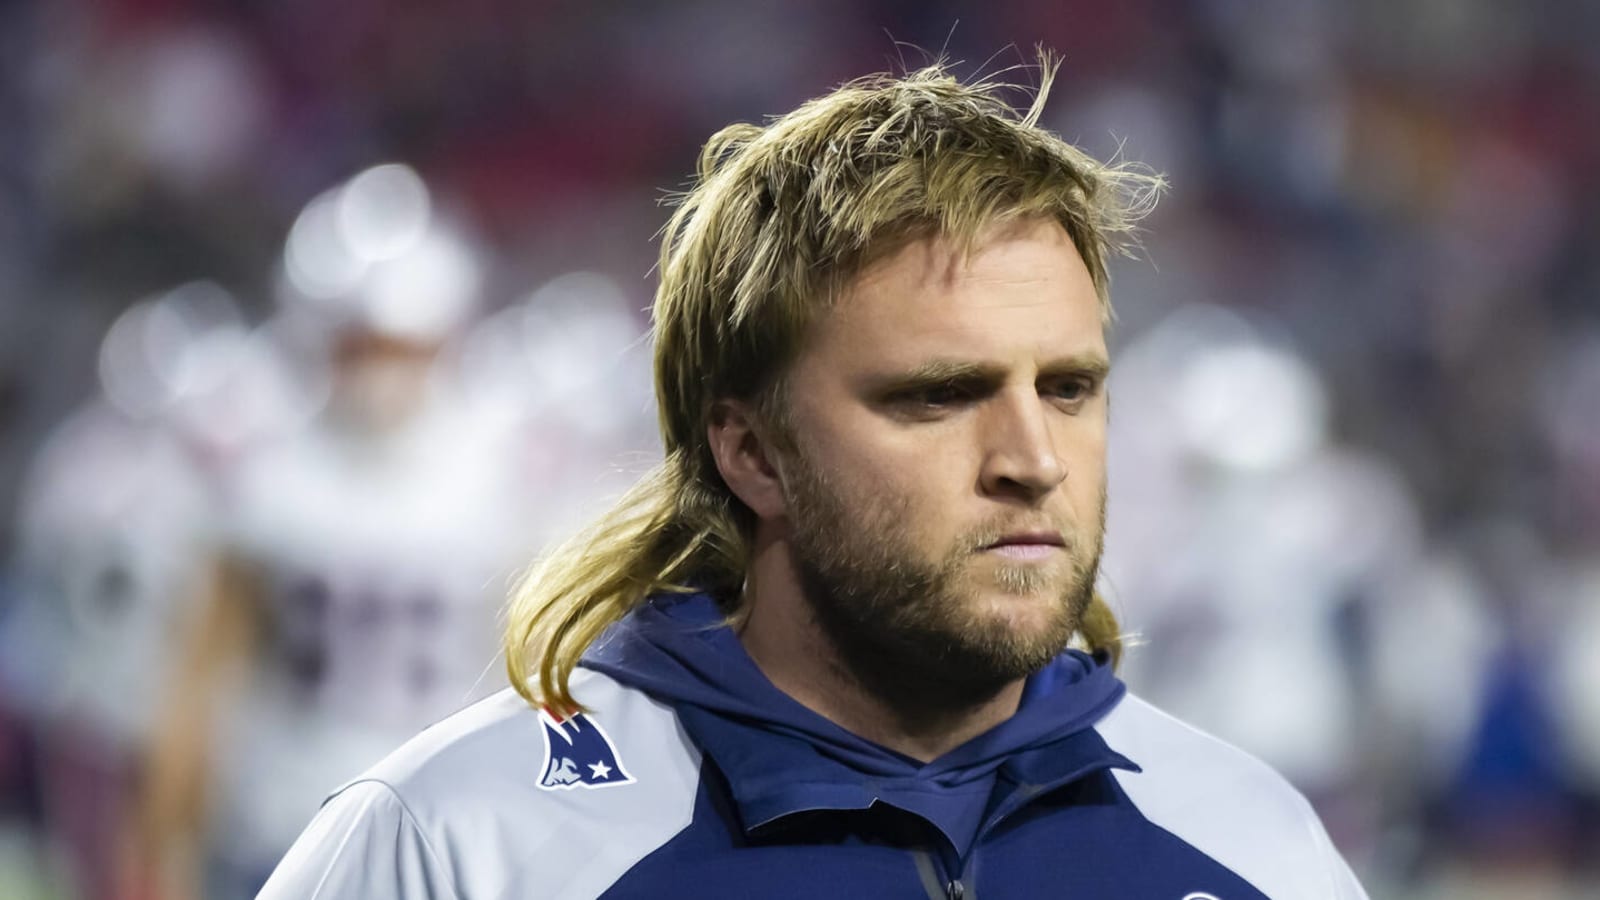 Steve Belichick roasts his father, Bill, with a great quote